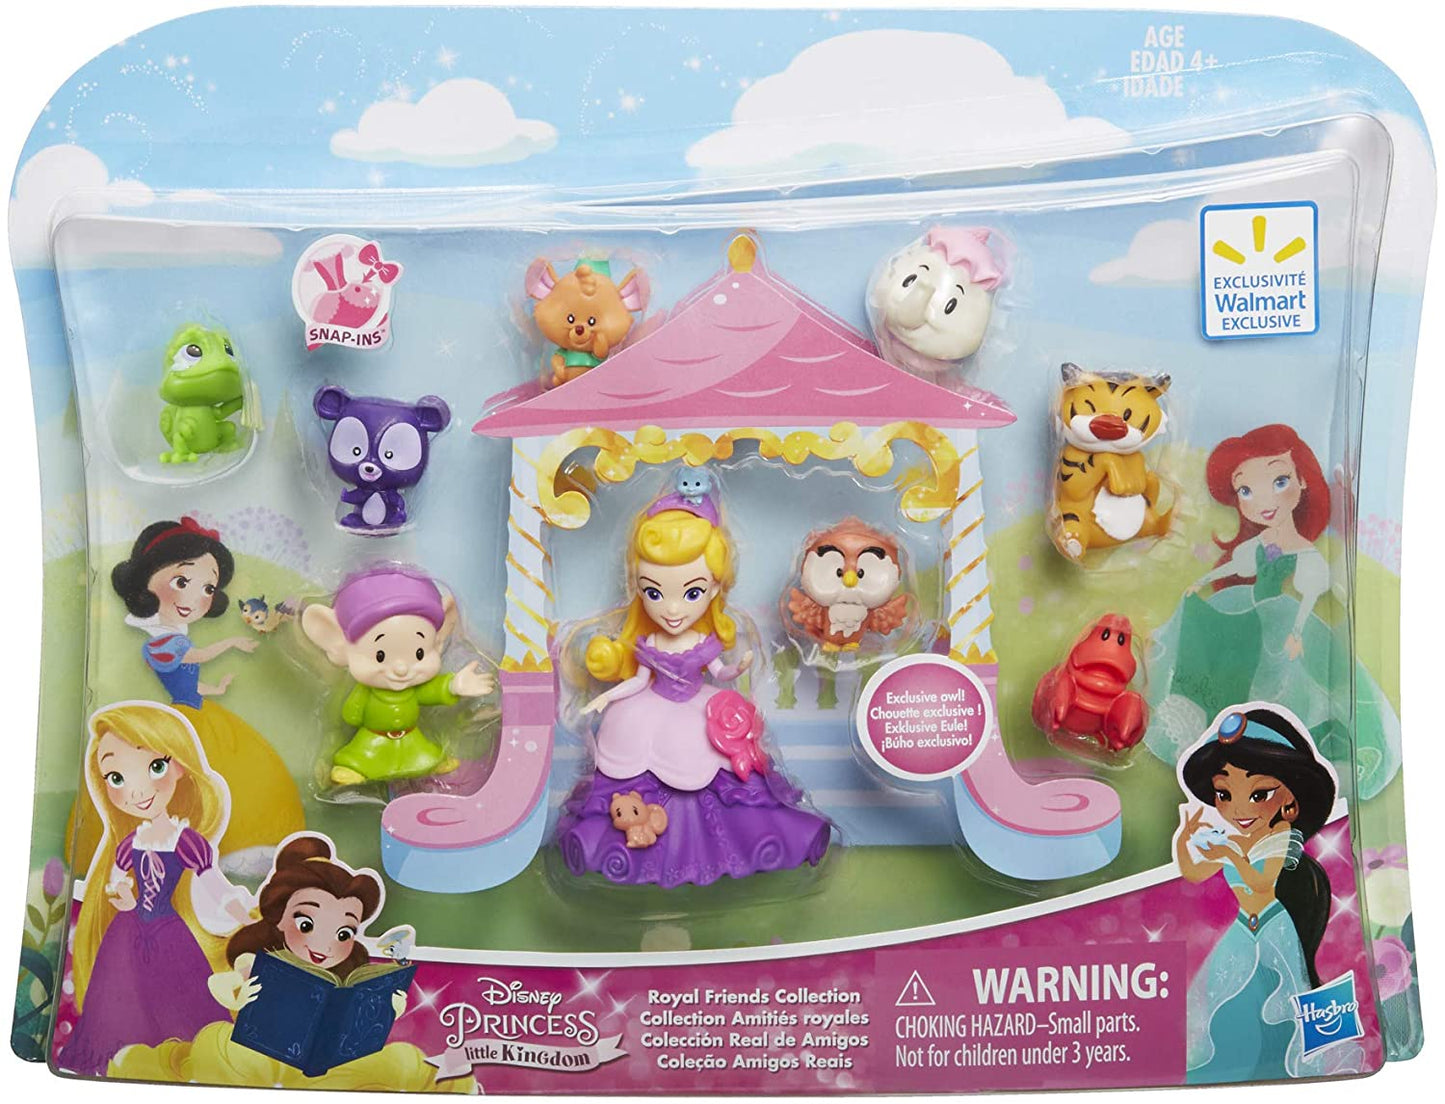 Little Kingdom Disney Princess Royal Friends Collection - 9-Piece set includes Aurora, Pascal, Dopey, Gus, Rajah and more